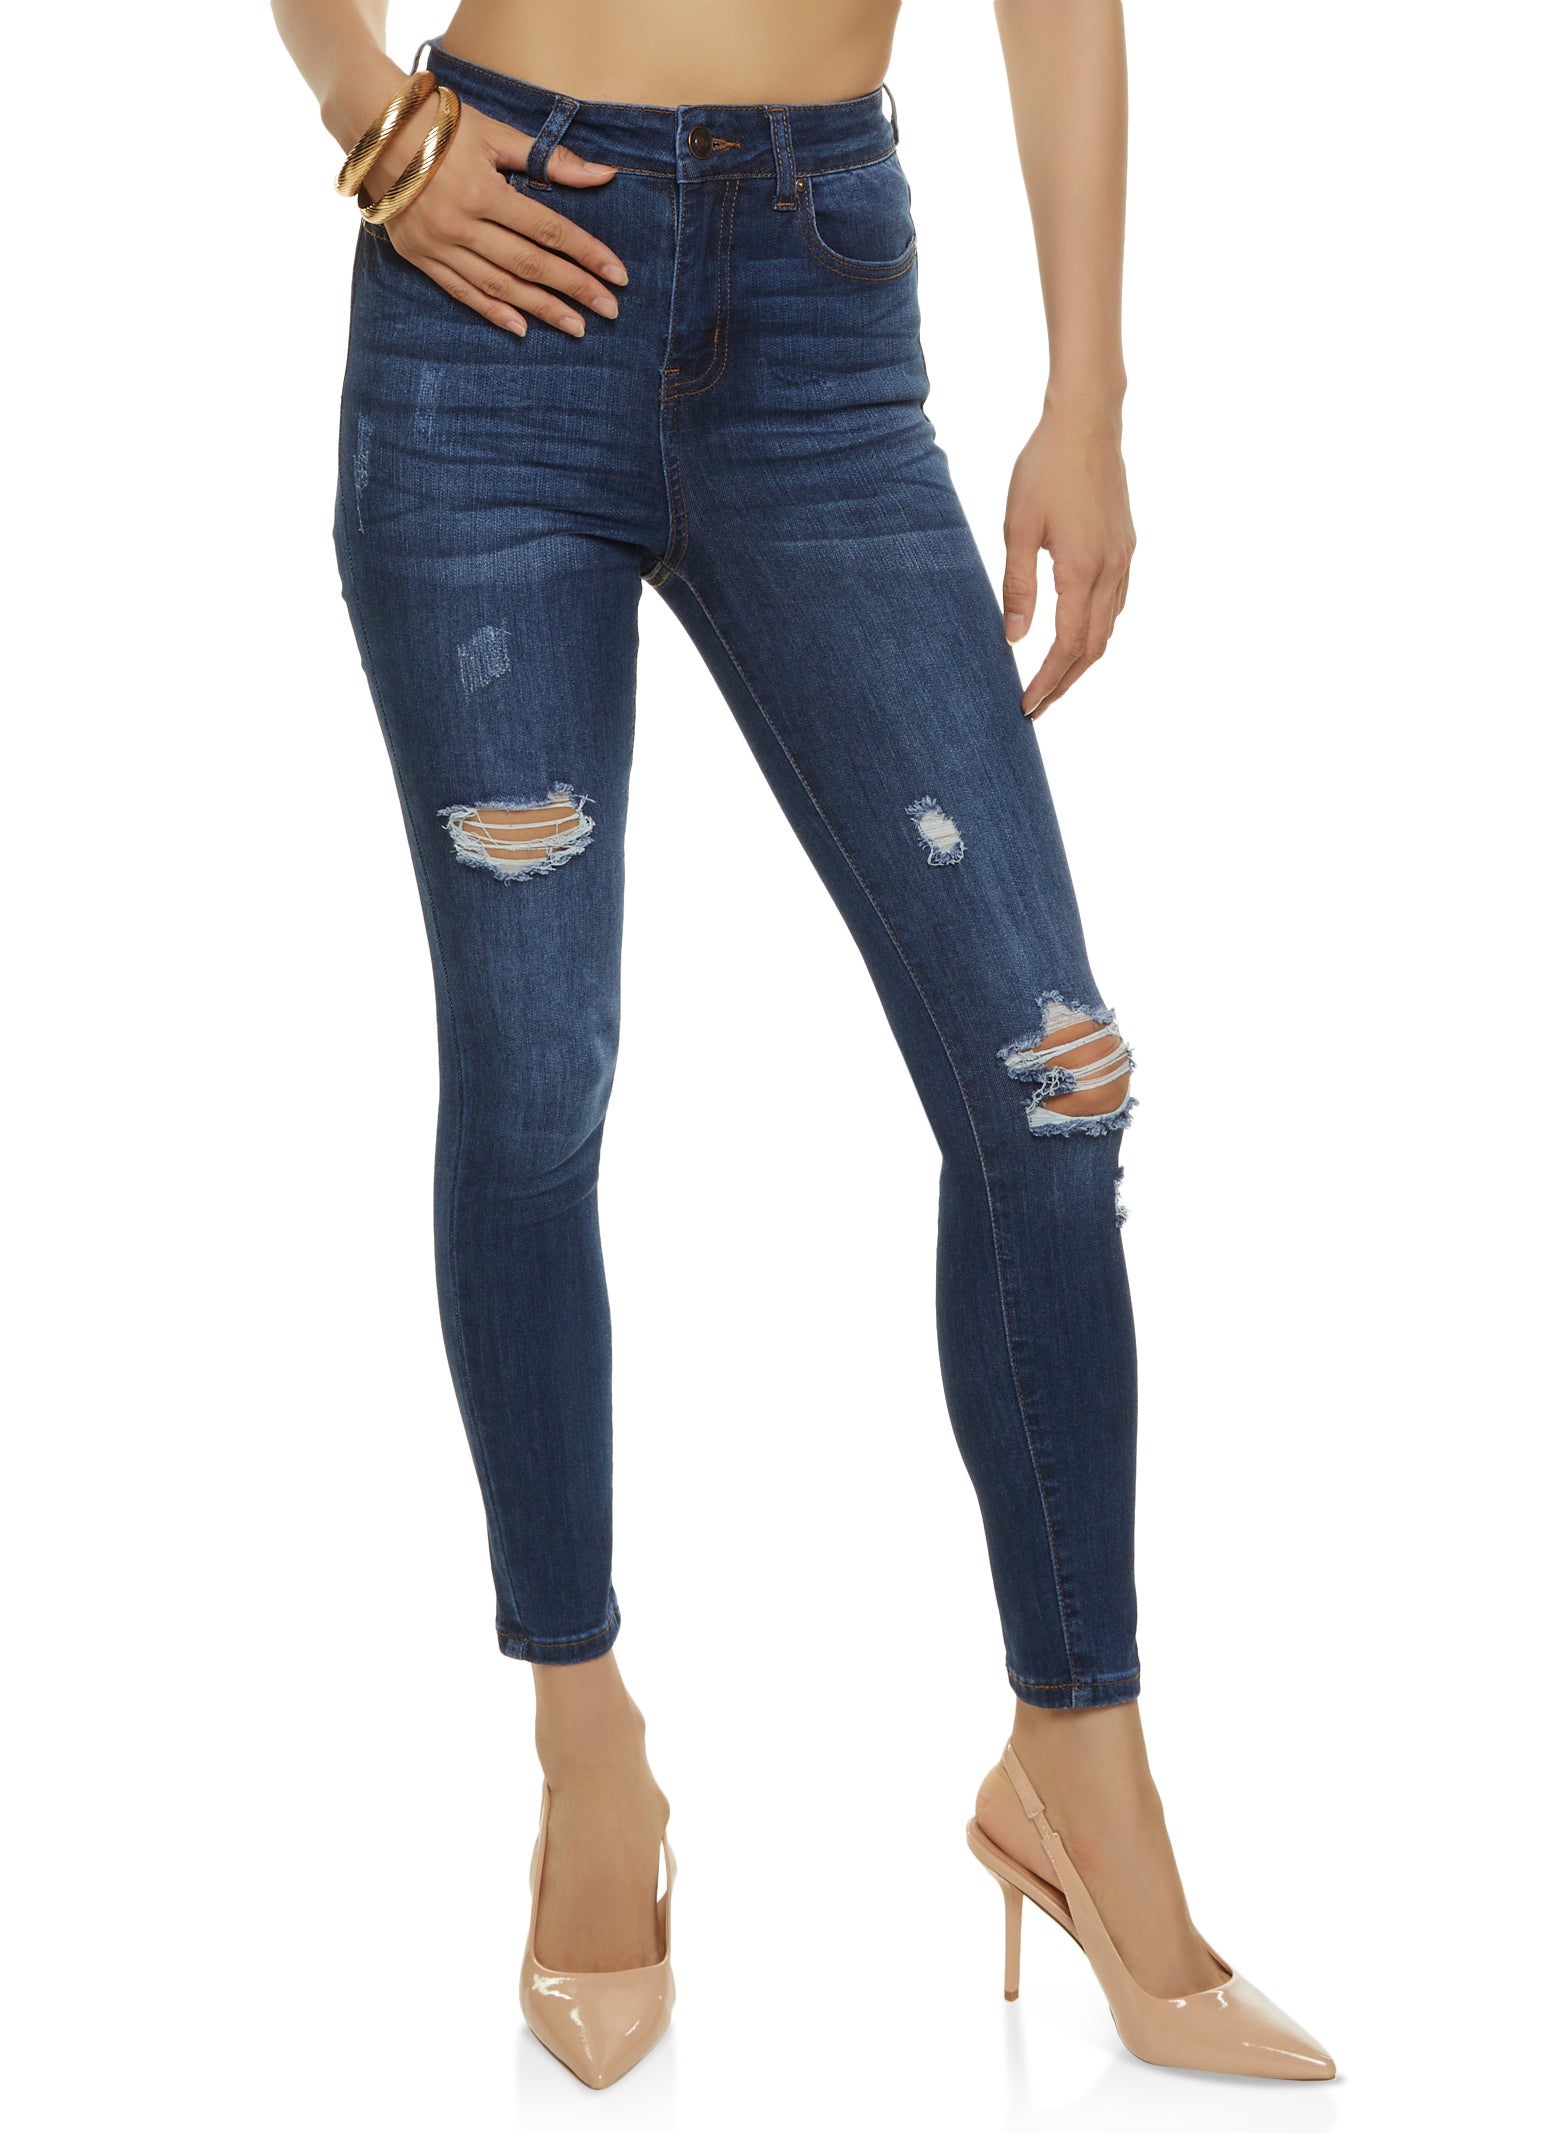 WAX Stretch Distressed High Rise Jeans